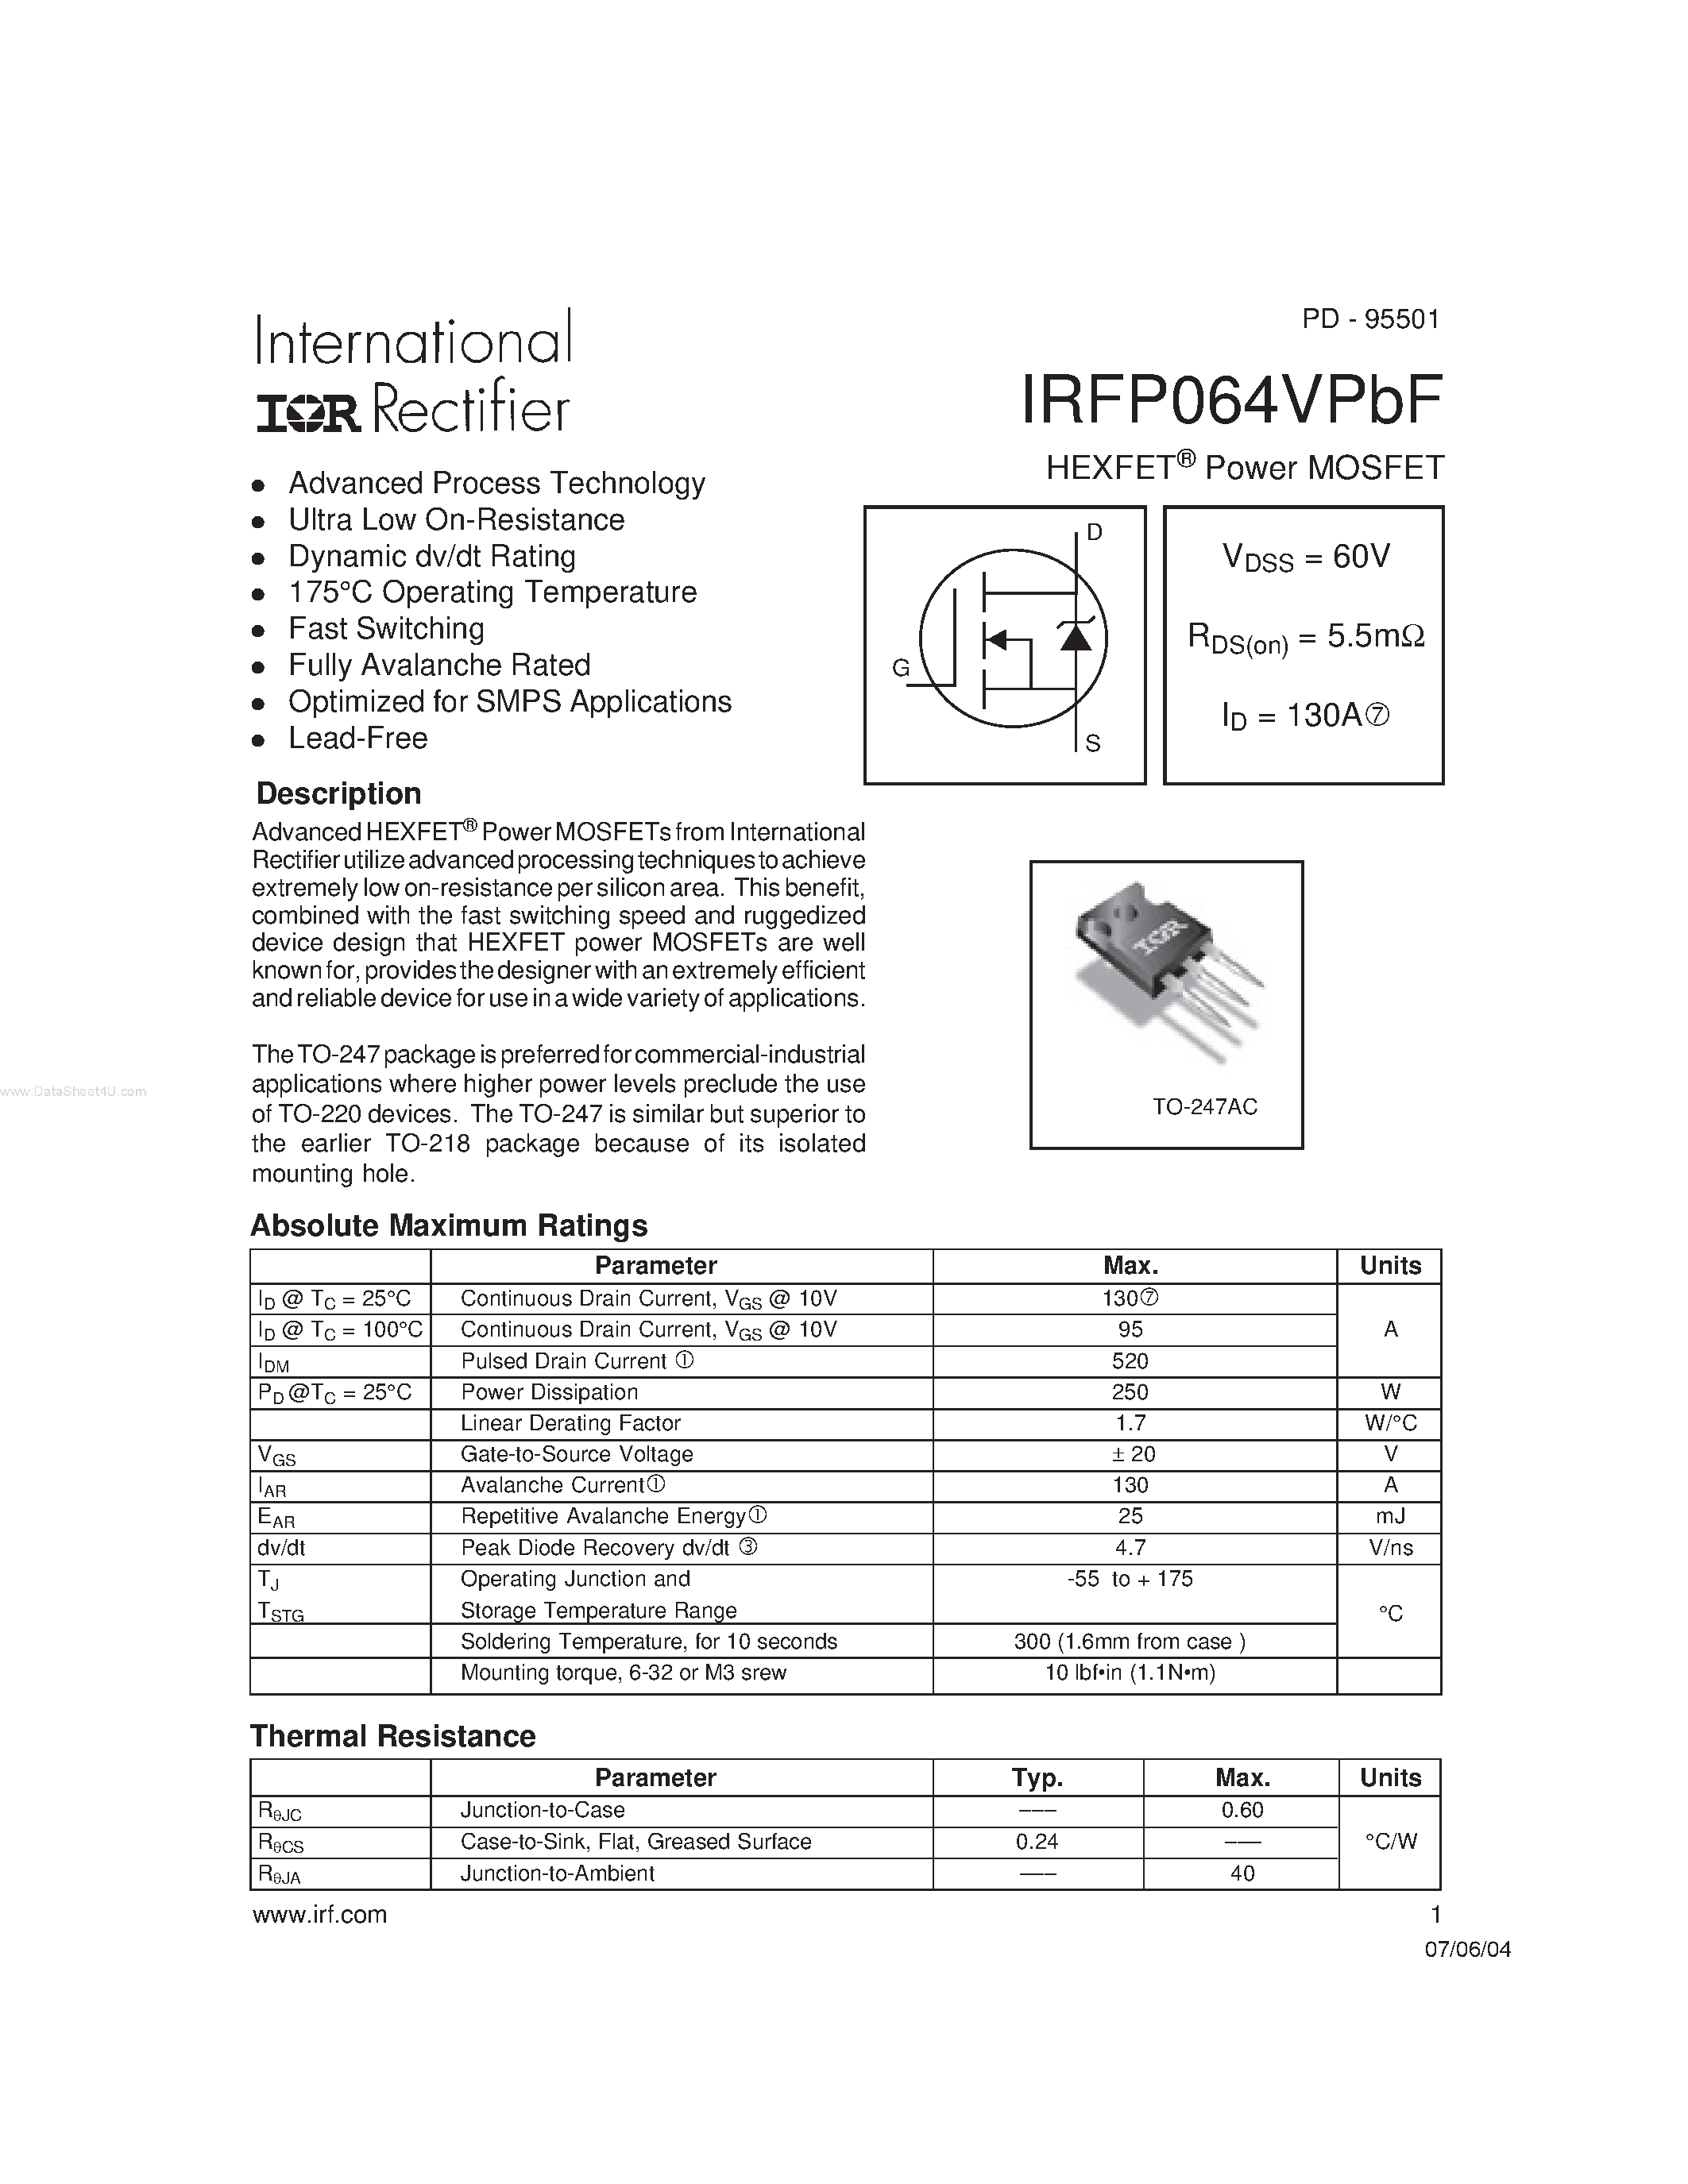 Datasheet IRFP064VPBF - HEXFET Power MOSFET page 1